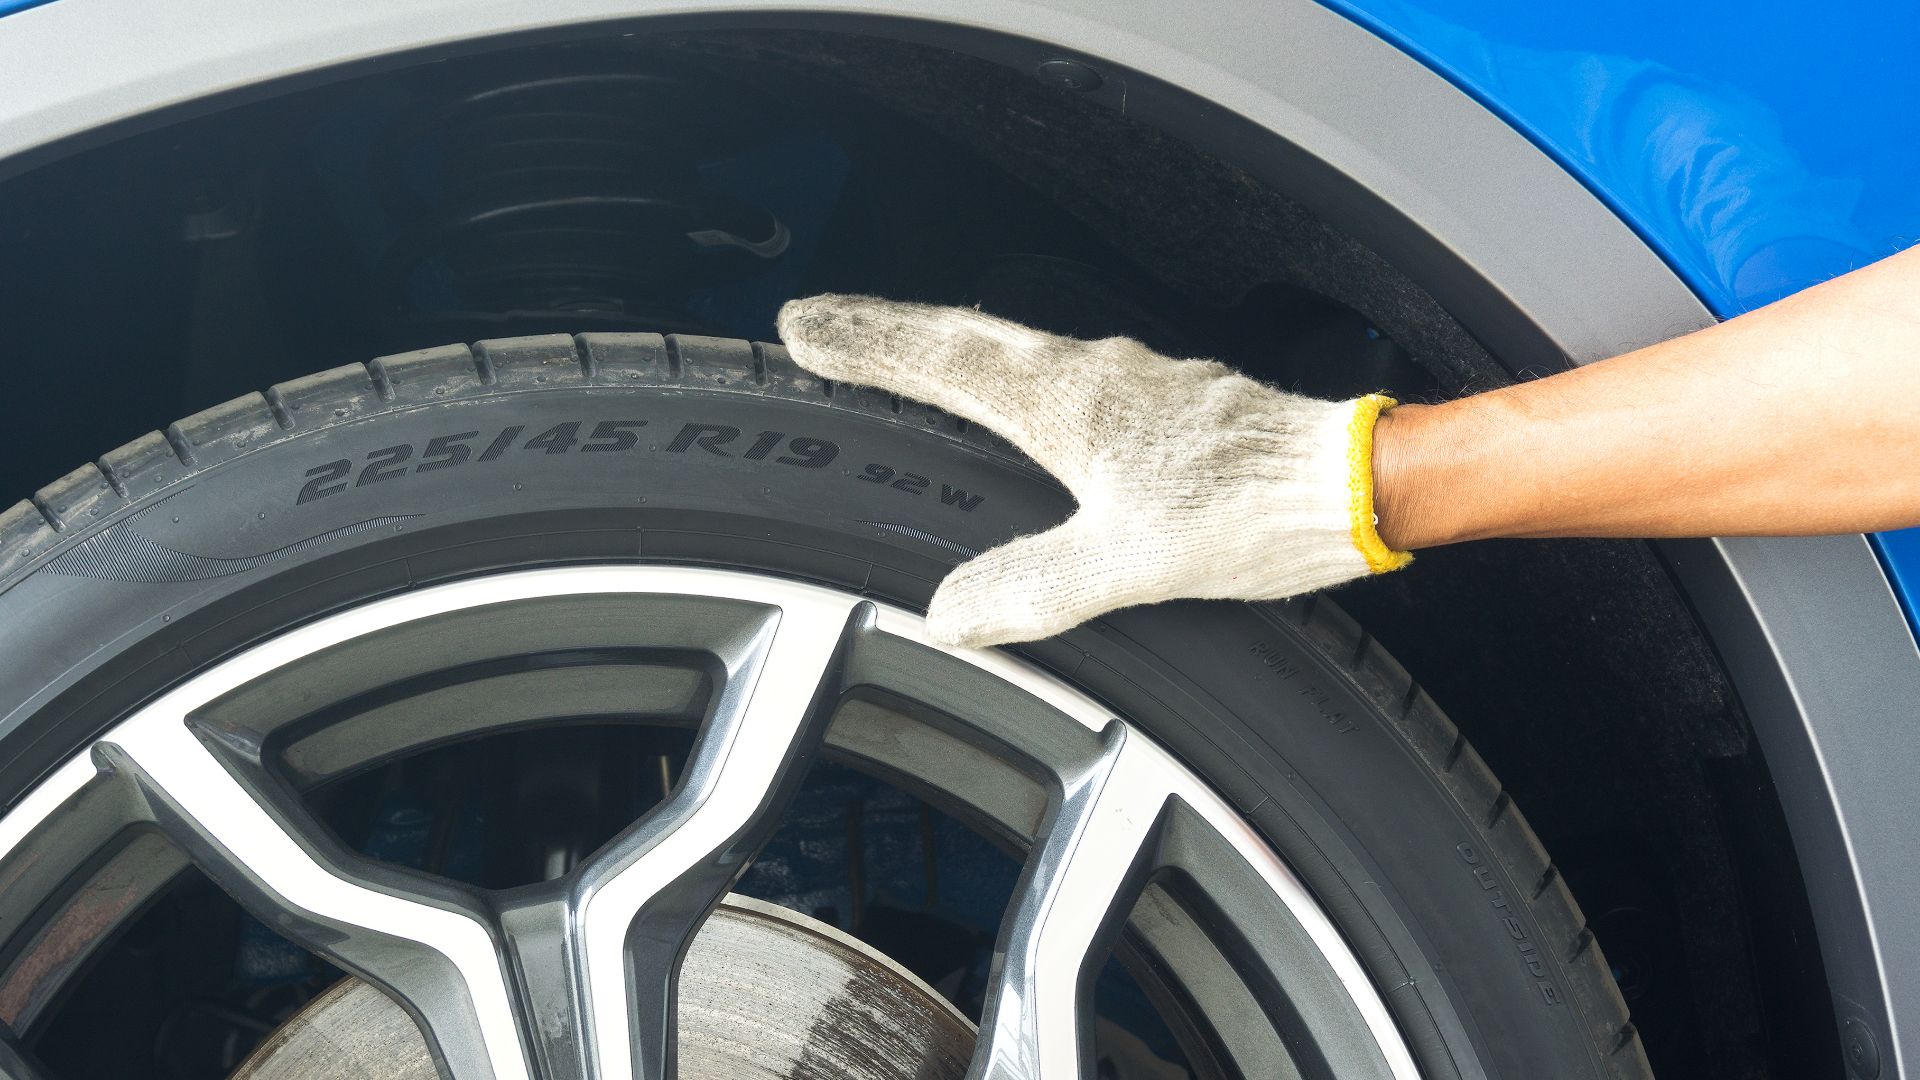 a person with a glove cleaning a car tire.